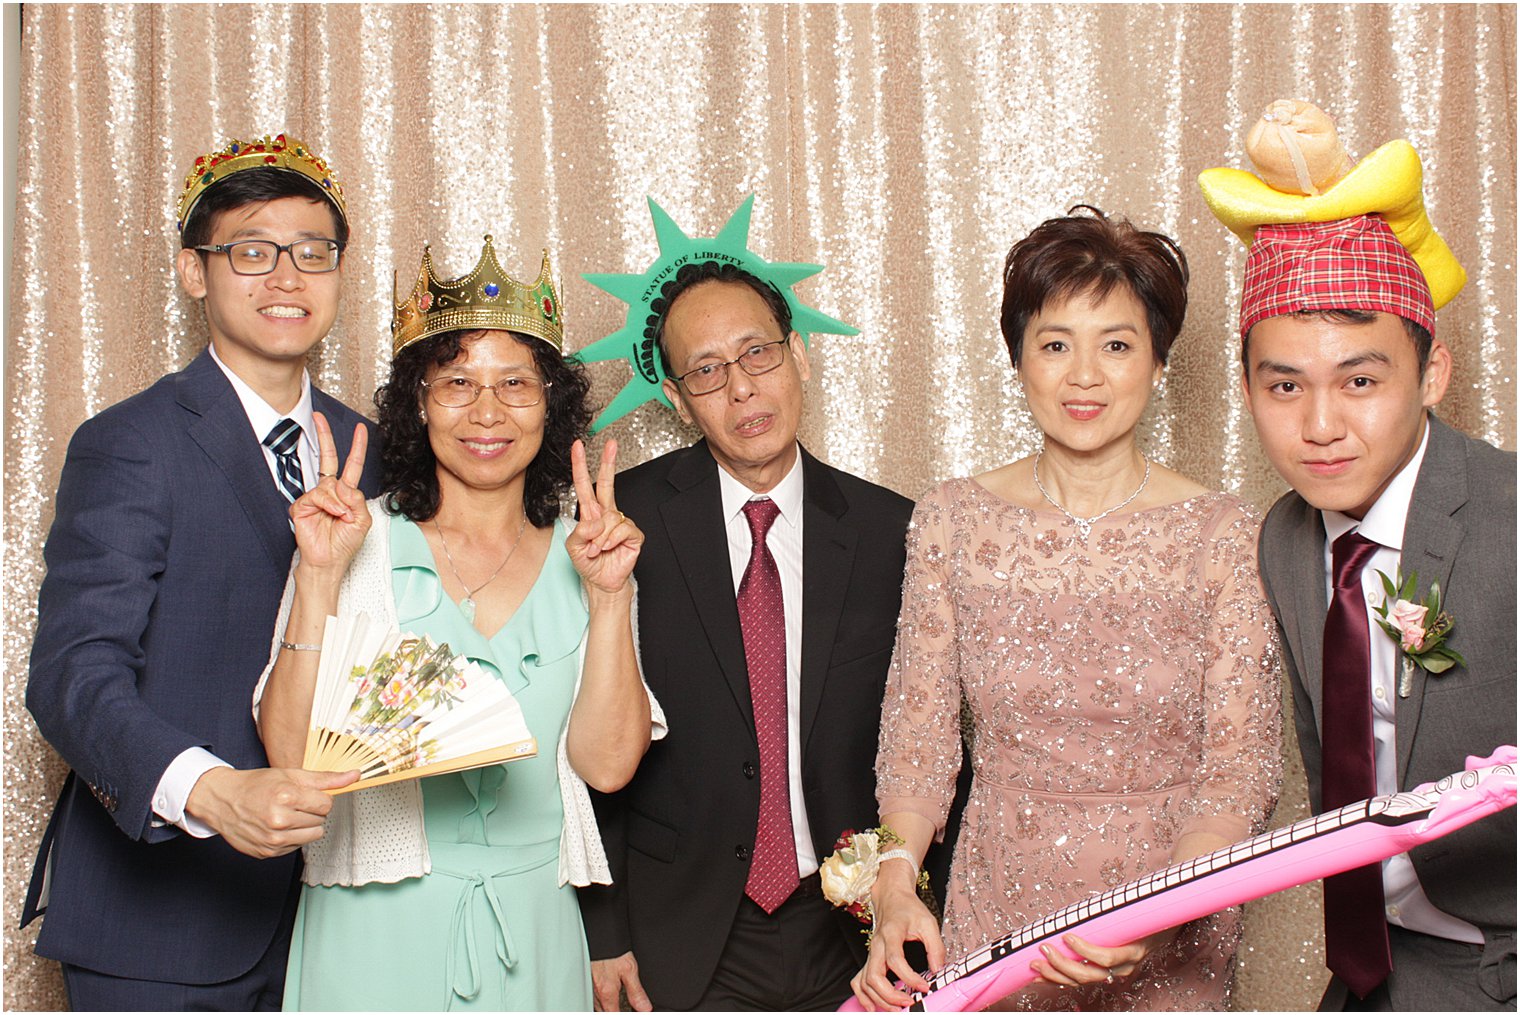 wedding guests wearing Statue of Liberty hats play in Park Chateau Estate Photo Booth